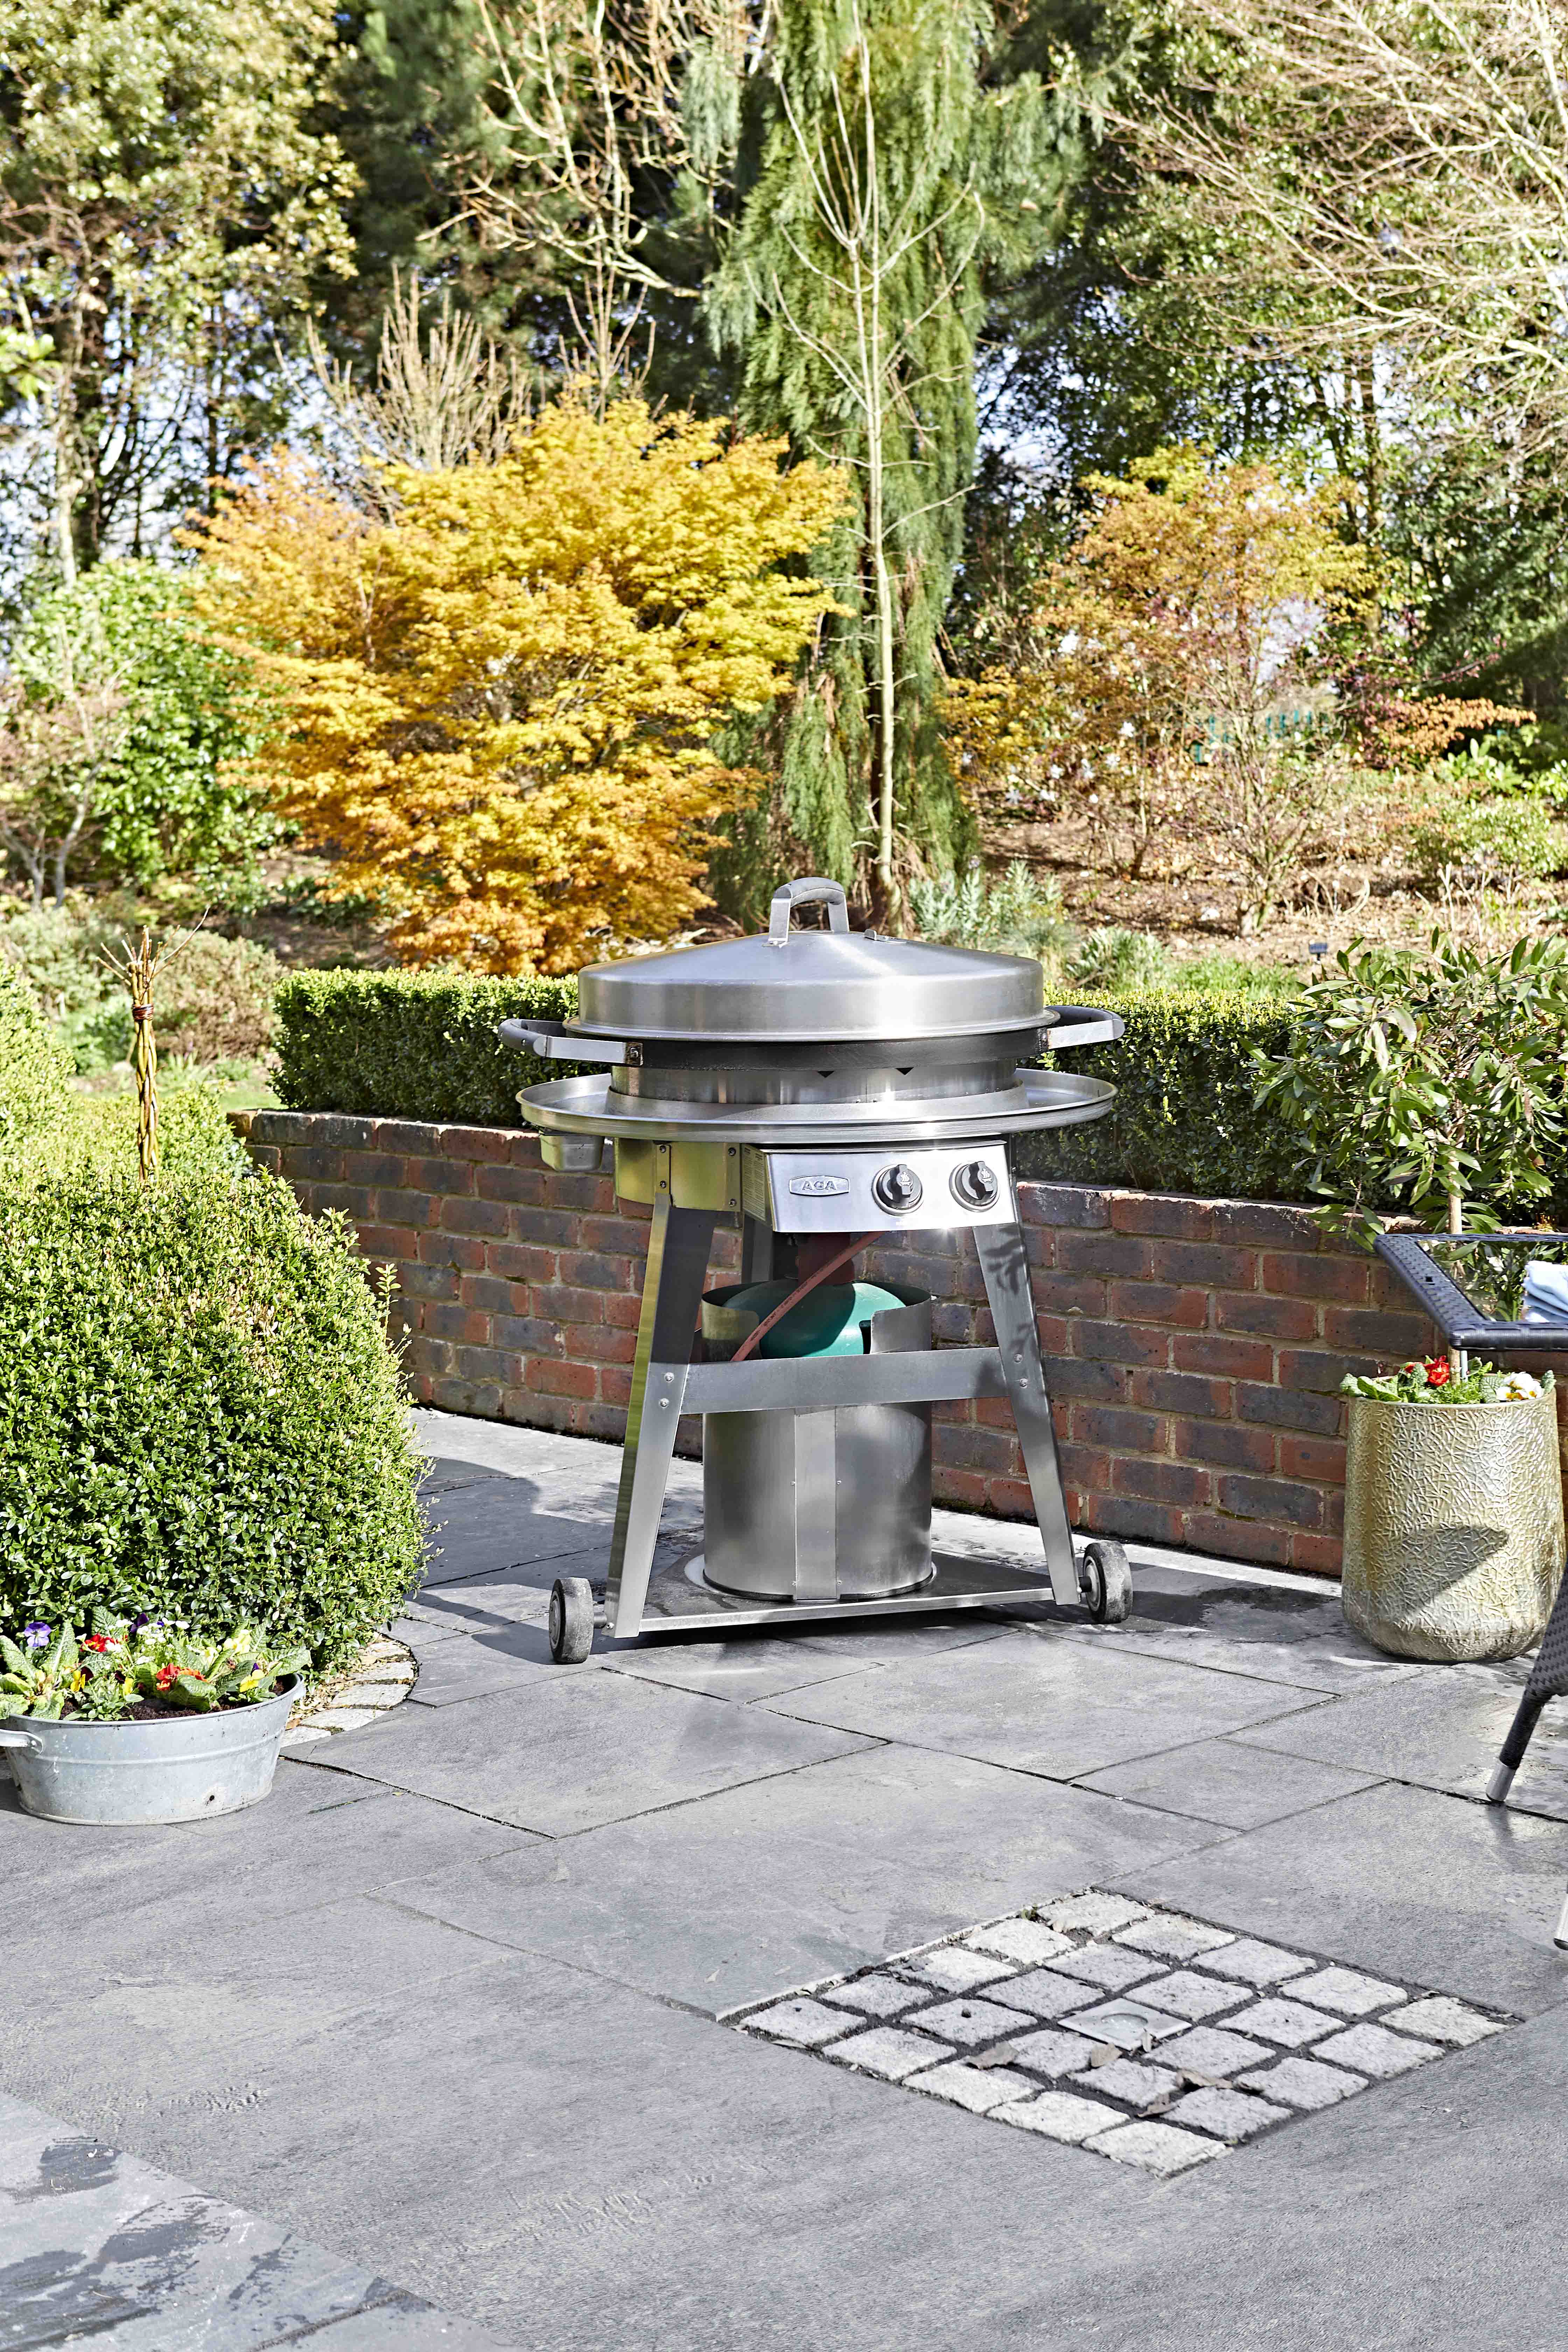 AGA Outdoors Professional Series Grill Wheeled Cooktop in garden